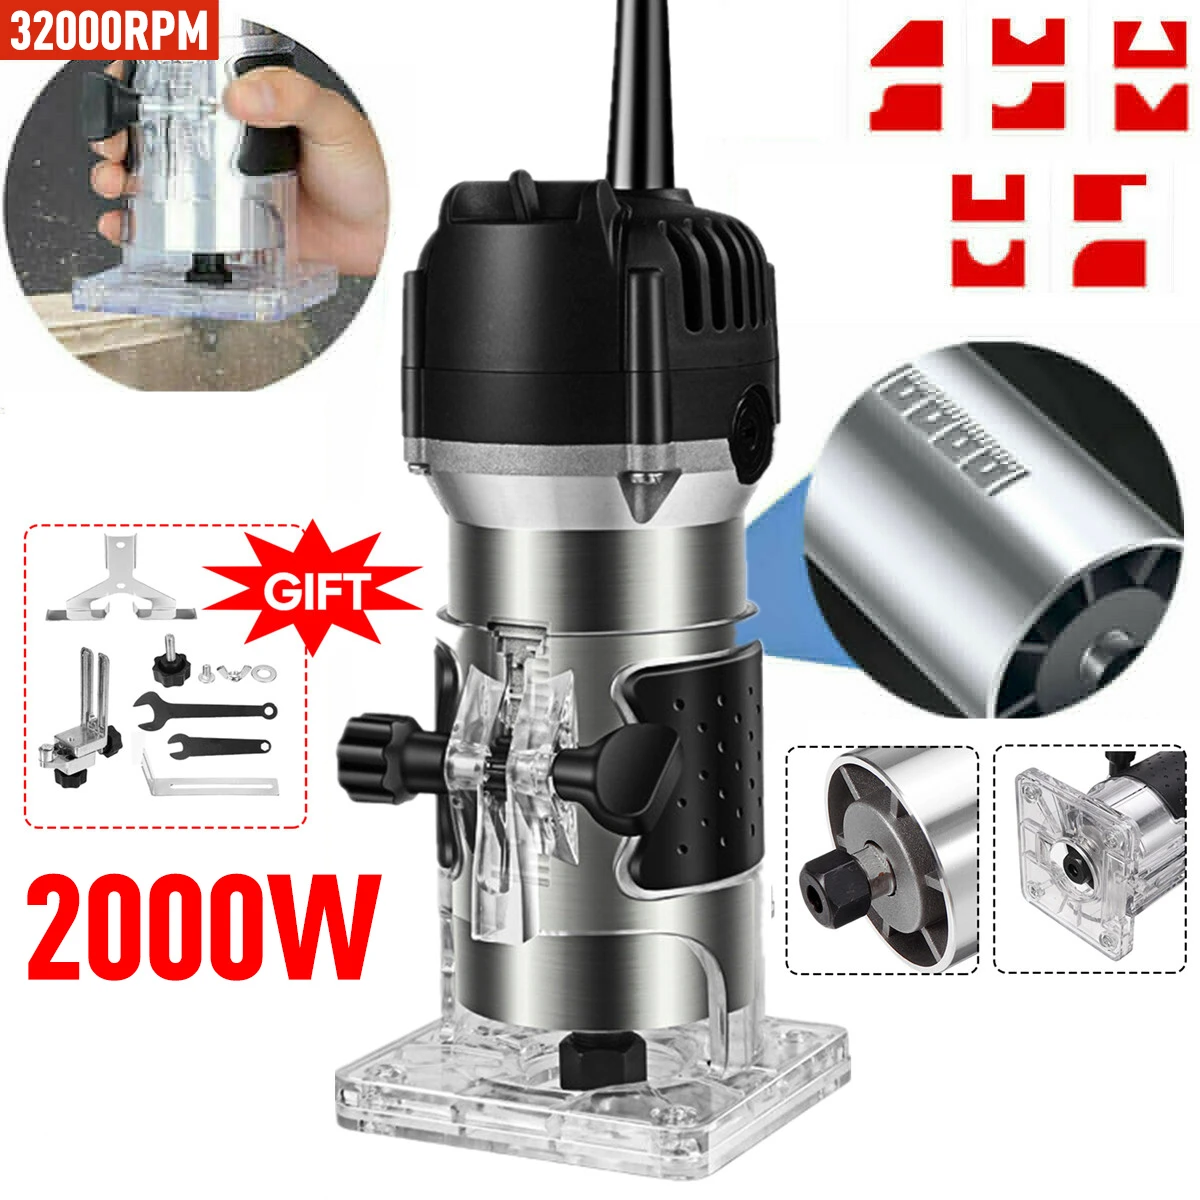 2000W 32000r Wood Router Tool Combo Kit Electric Woodworking Machines Power Carpentry Manual Trimmer Tools With Milling Cutter